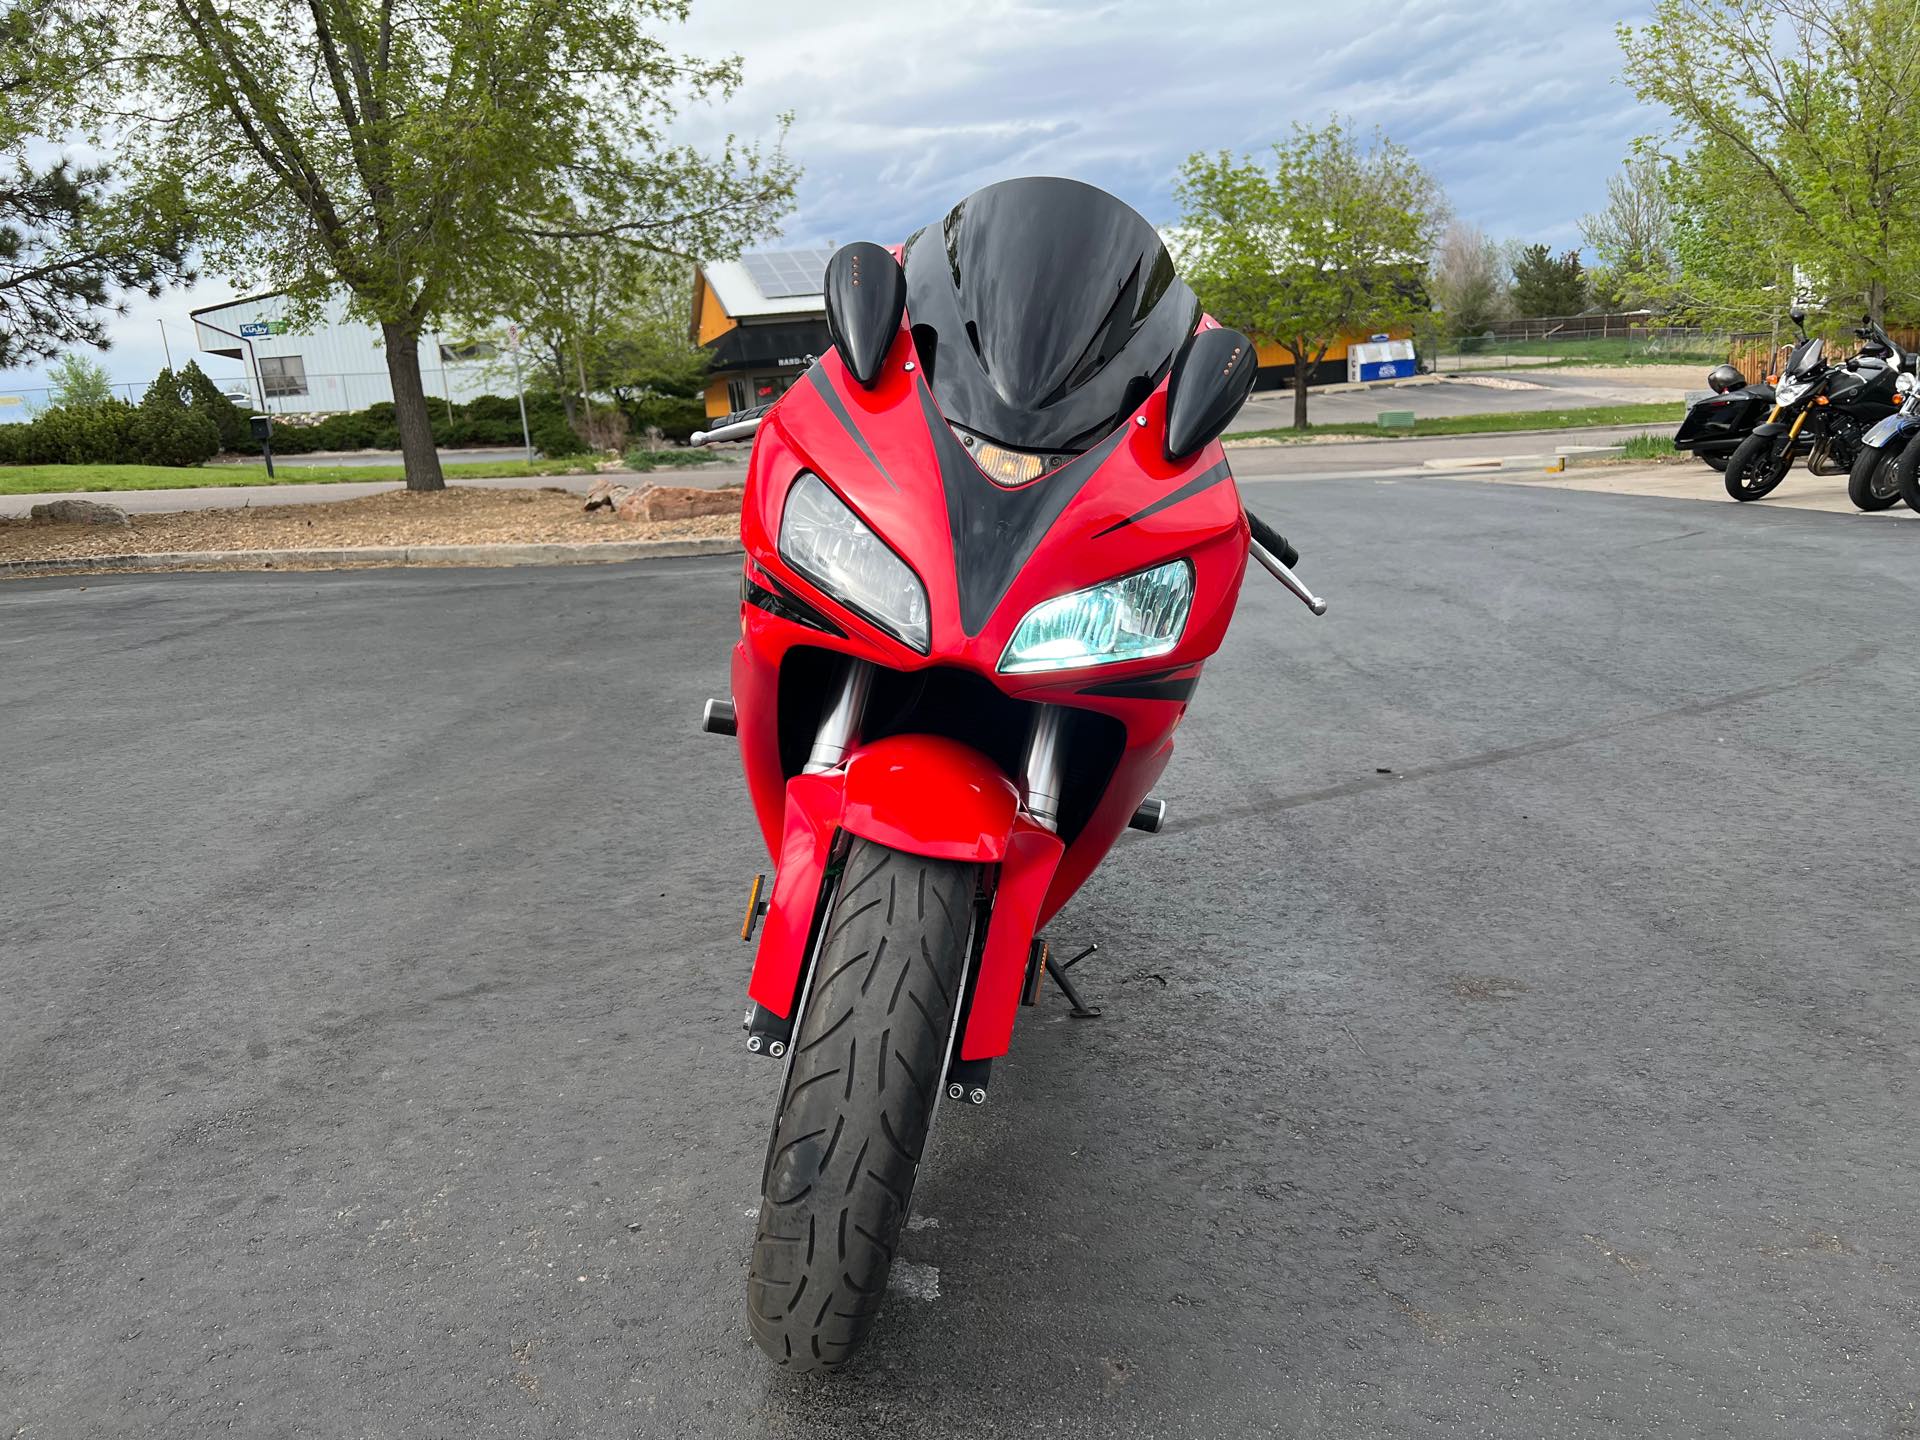 2007 Honda CBR 1000RR at Aces Motorcycles - Fort Collins